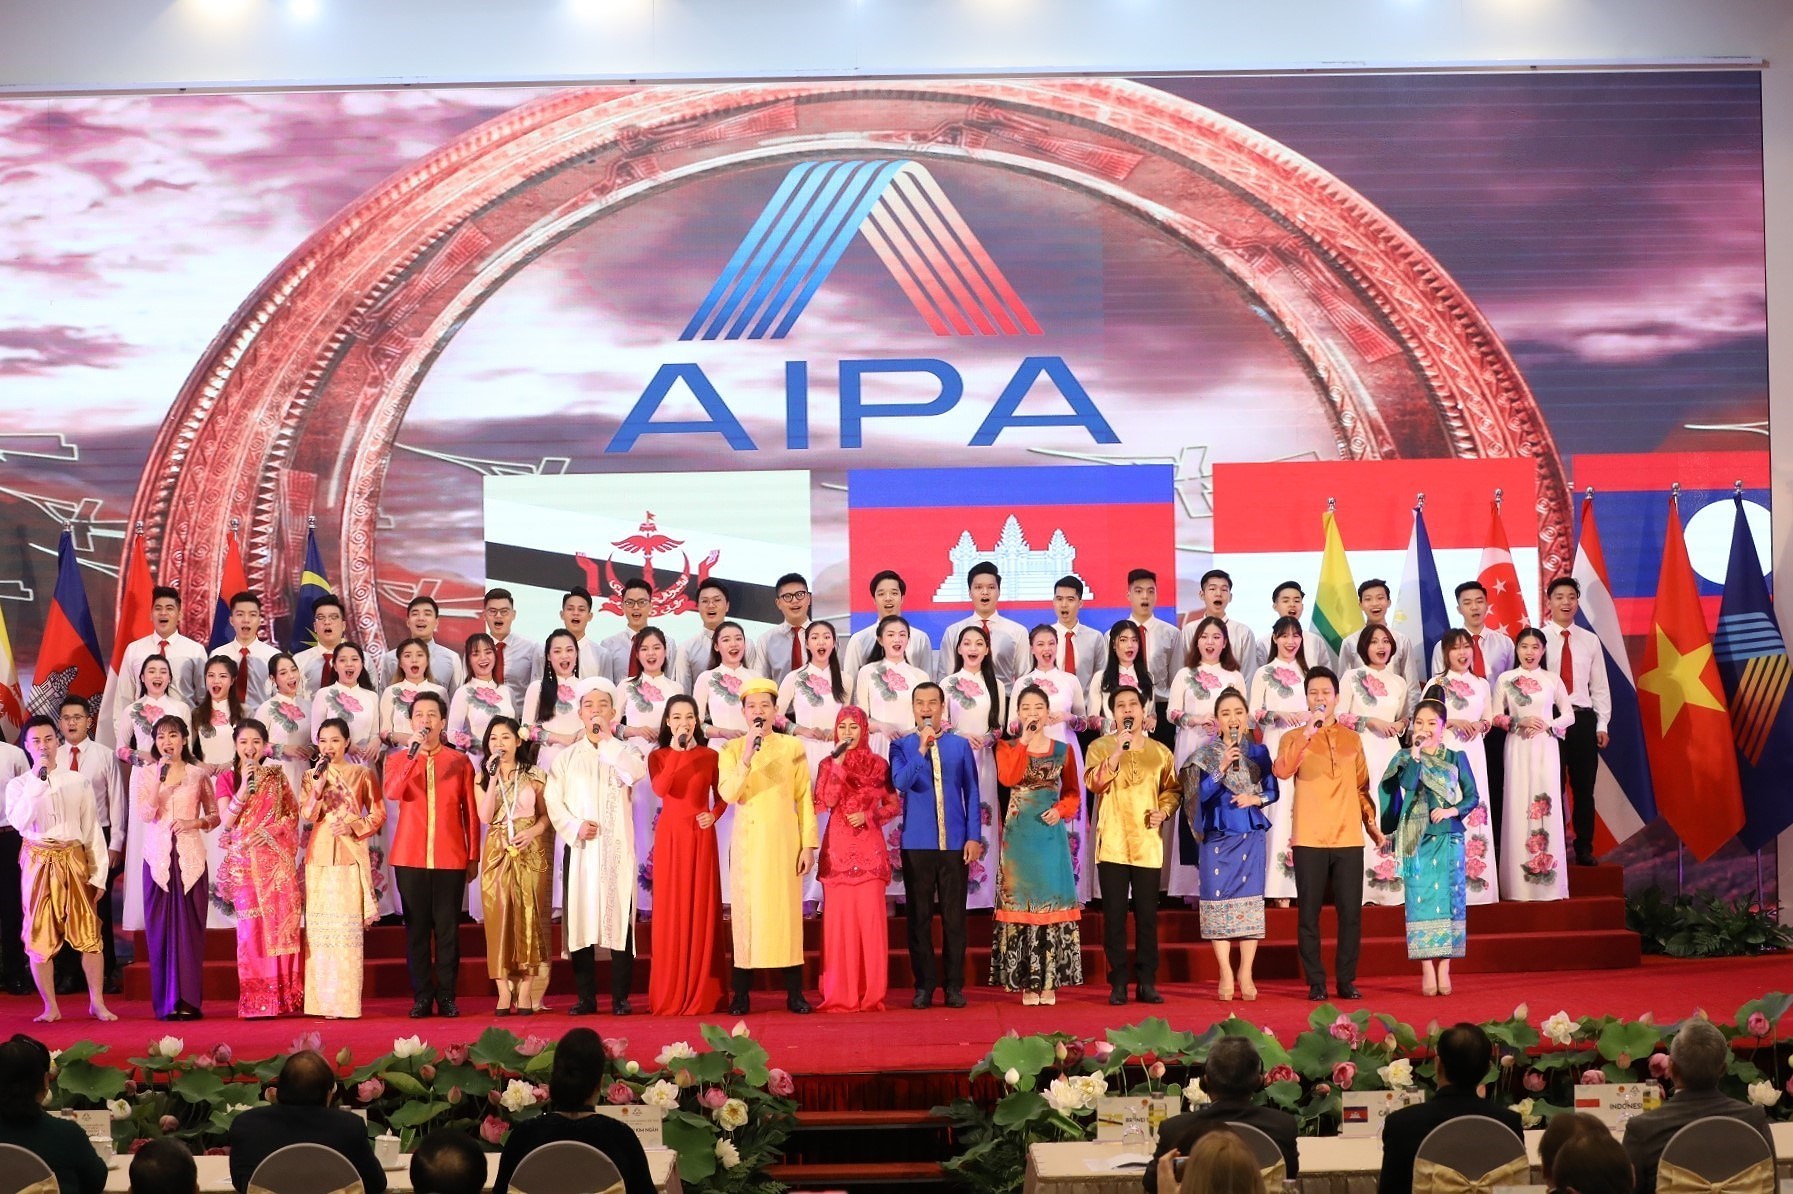 AIPA-41: AIPA exerting efforts to contribute to regional connectivity hinh anh 1